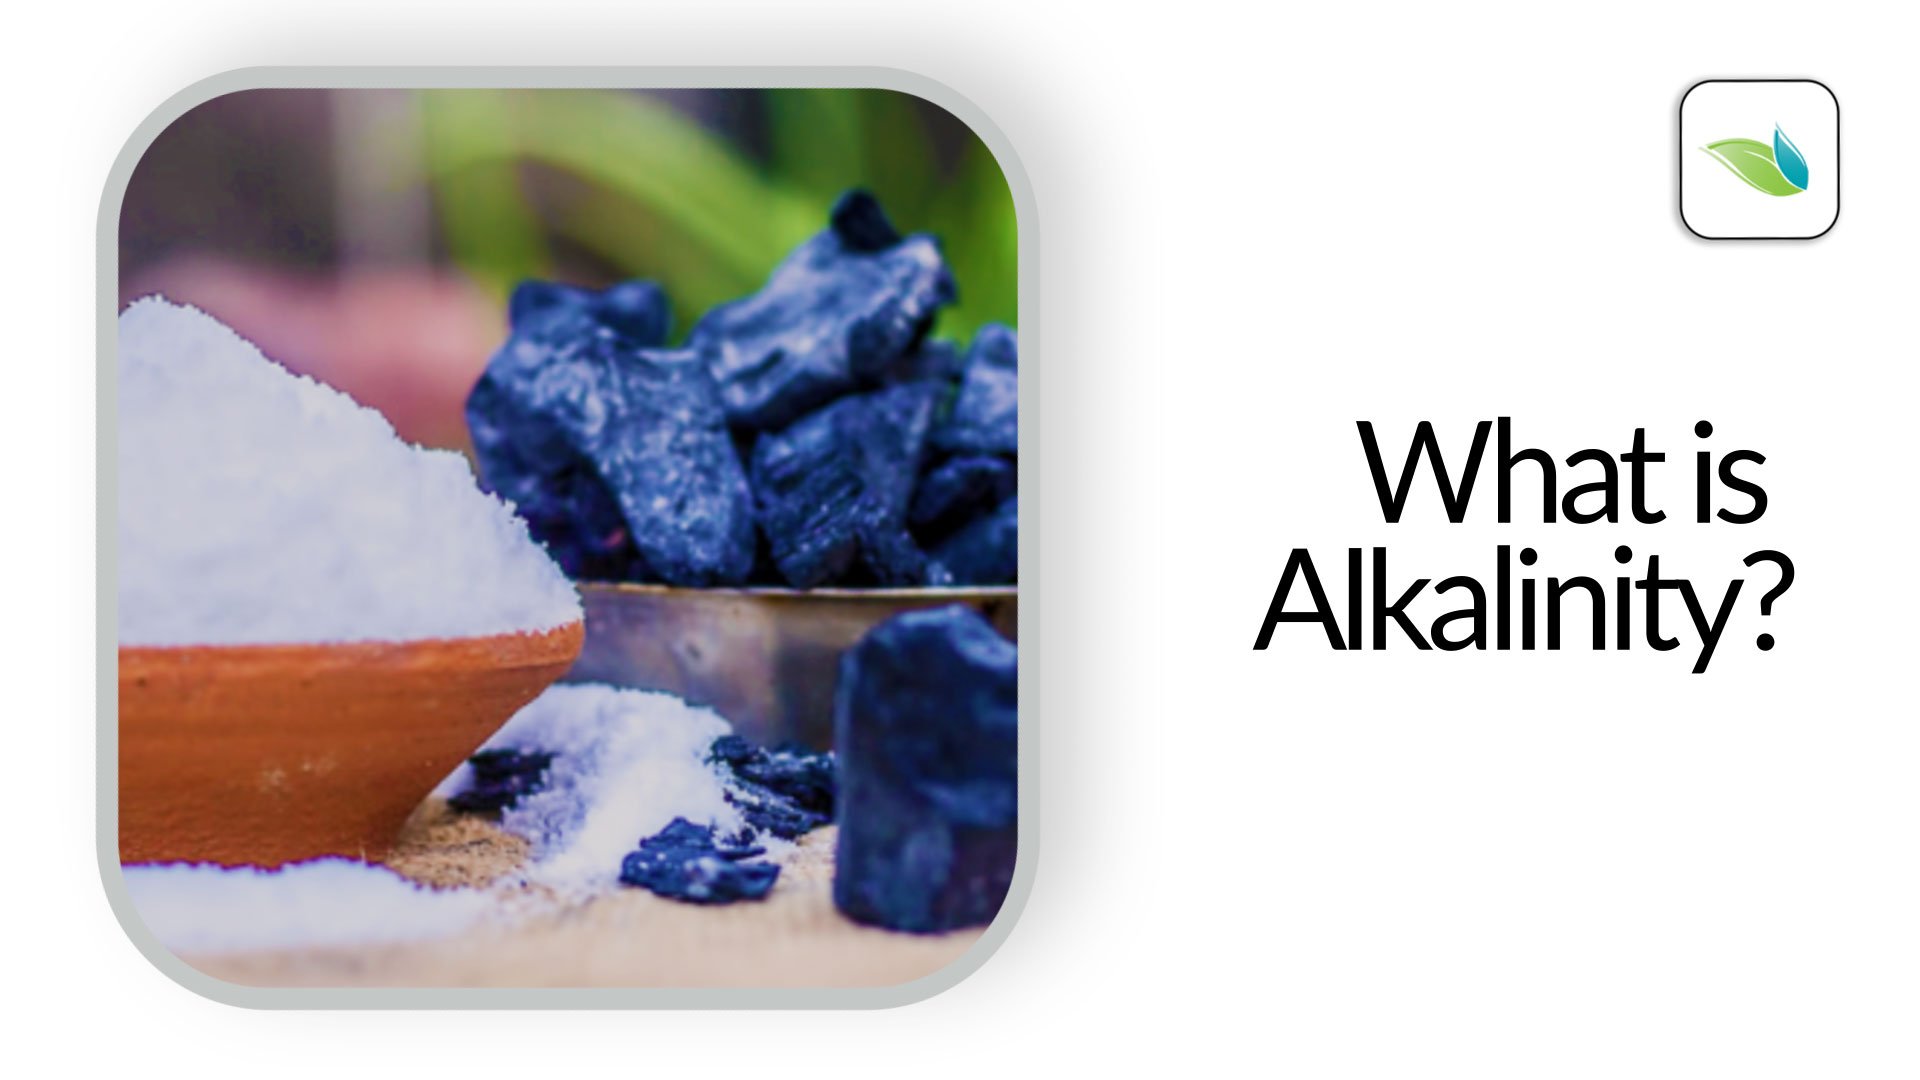 Natural Water Alkalinity: How to Measure, Test Kits, & More